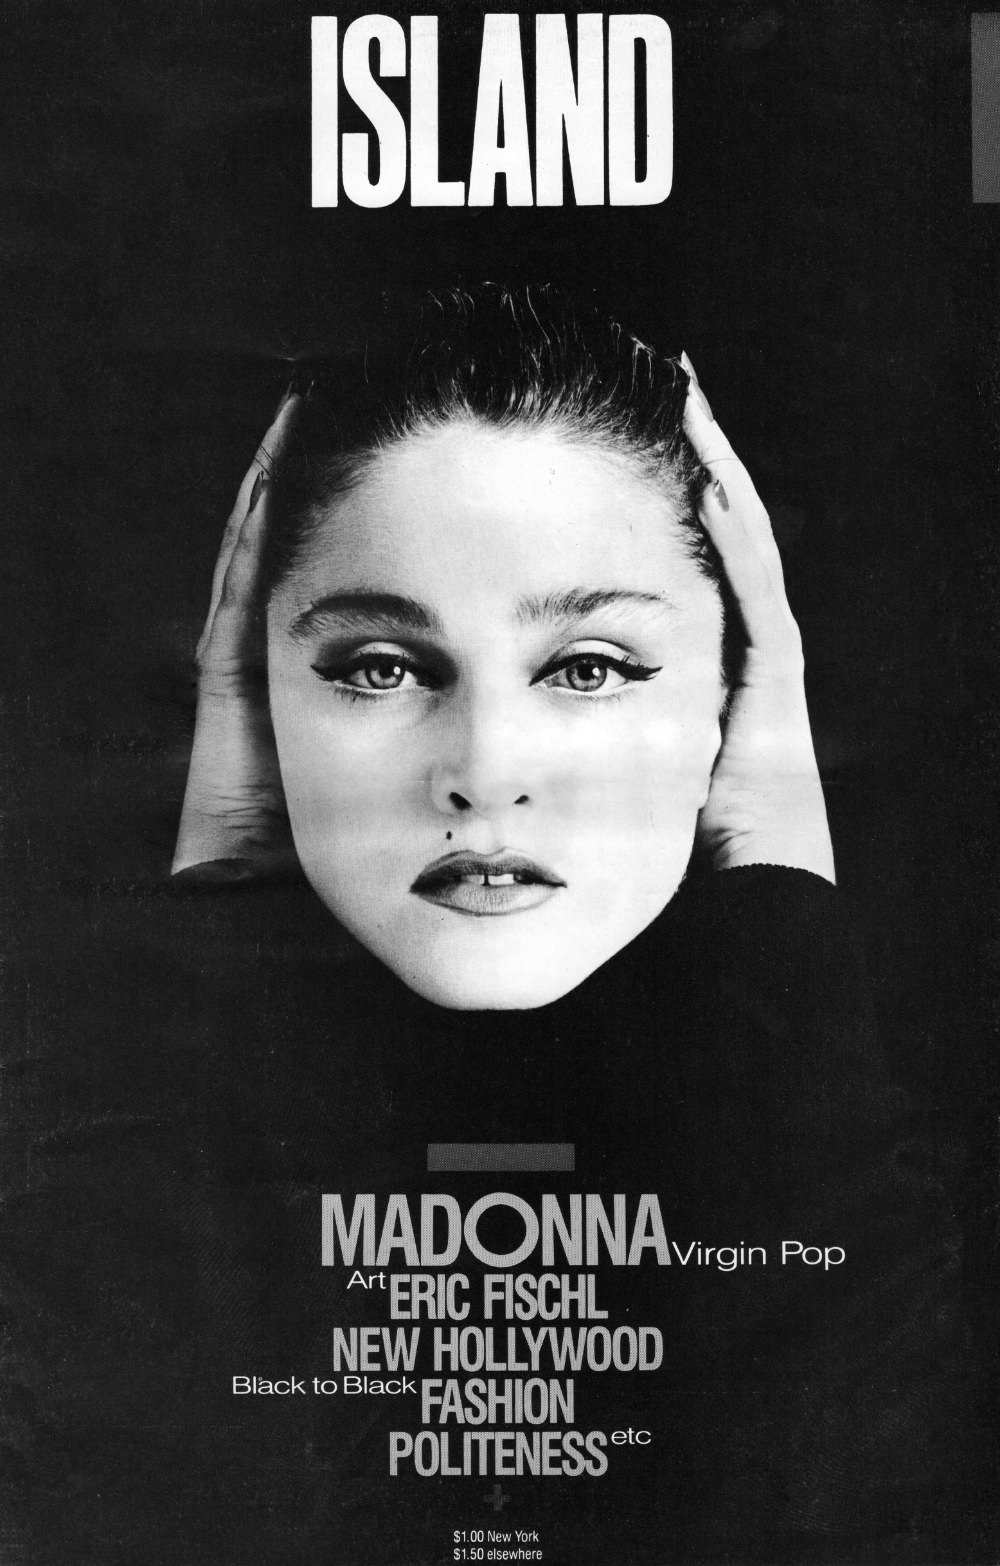 Madonna's Iconic 1983 Island Magazine Cover: A Snapshot in Time